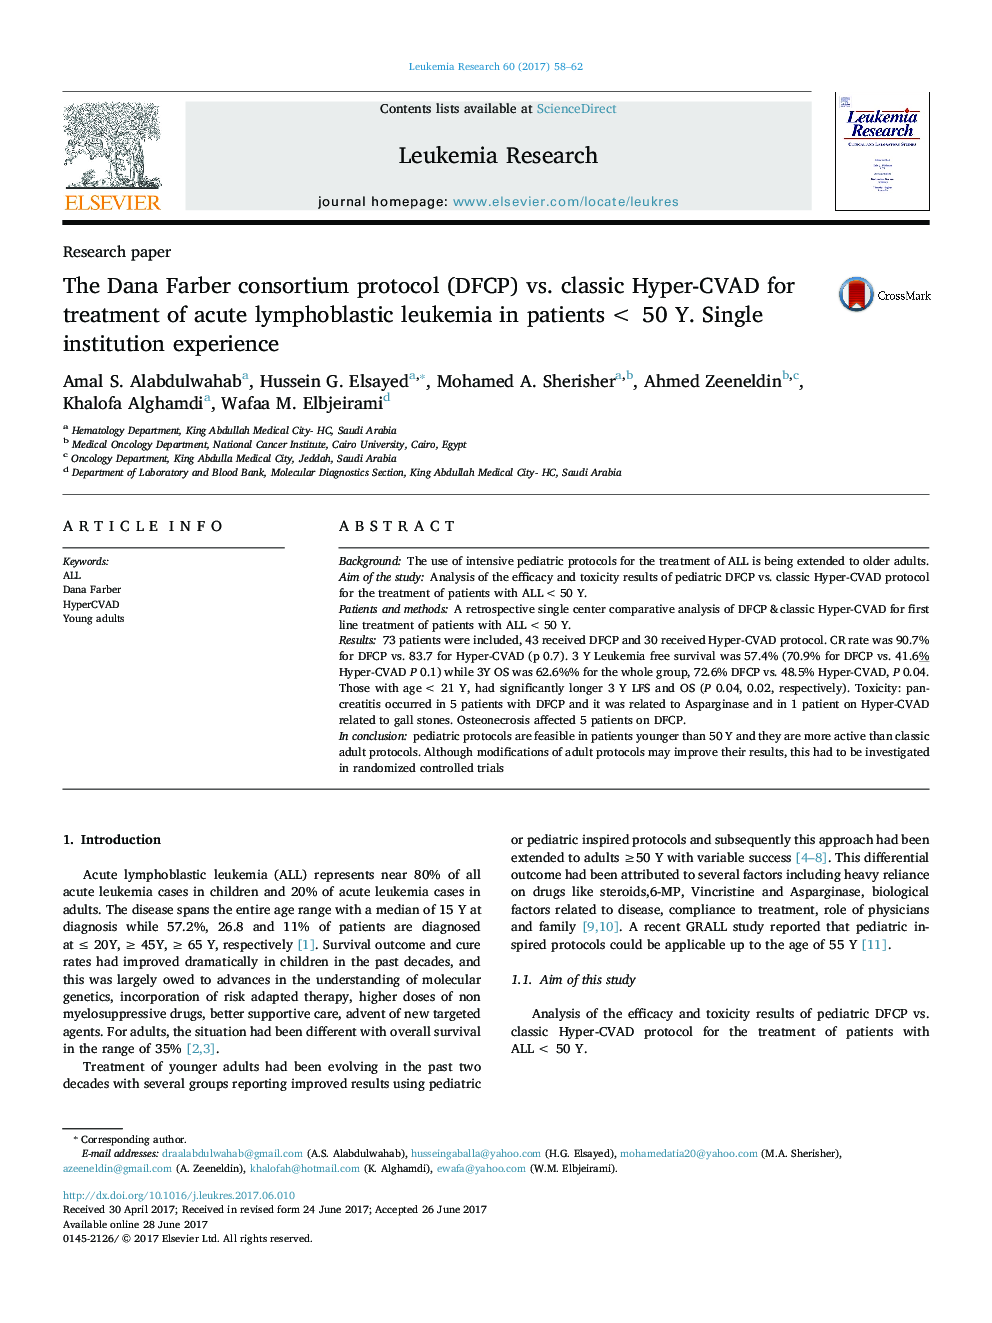 Research paperThe Dana Farber consortium protocol (DFCP) vs. classic Hyper-CVAD for treatment of acute lymphoblastic leukemia in patients <Â 50 Y. Single institution experience